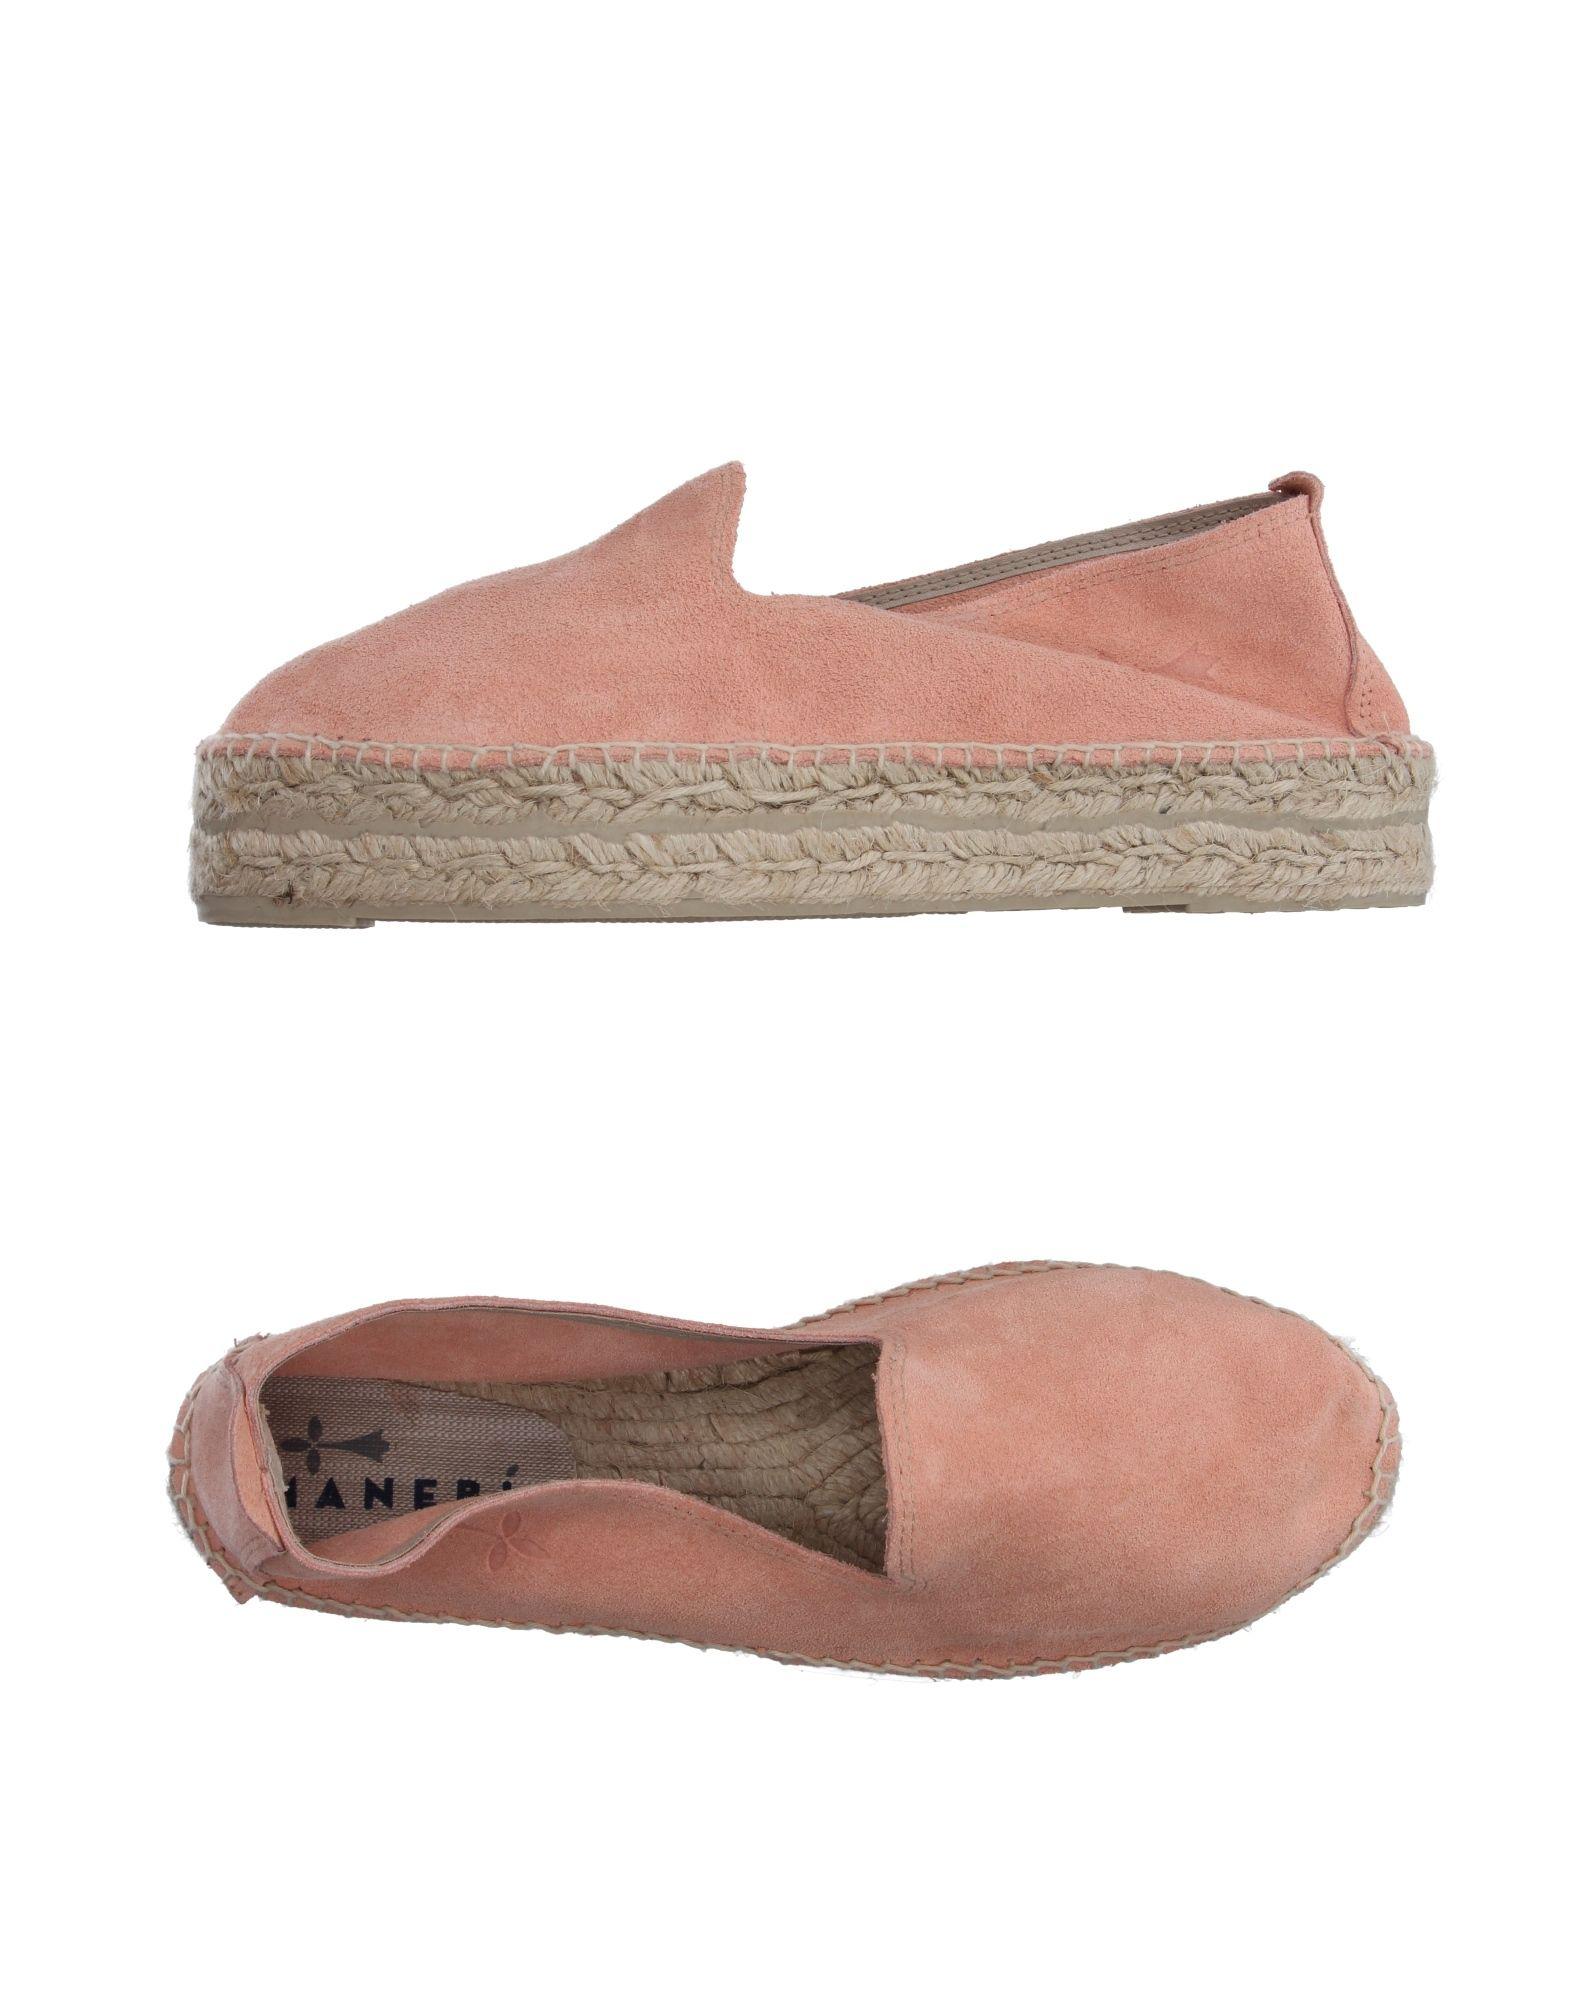 Manebí Leather Espadrilles in Salmon Pink (Pink) - Lyst